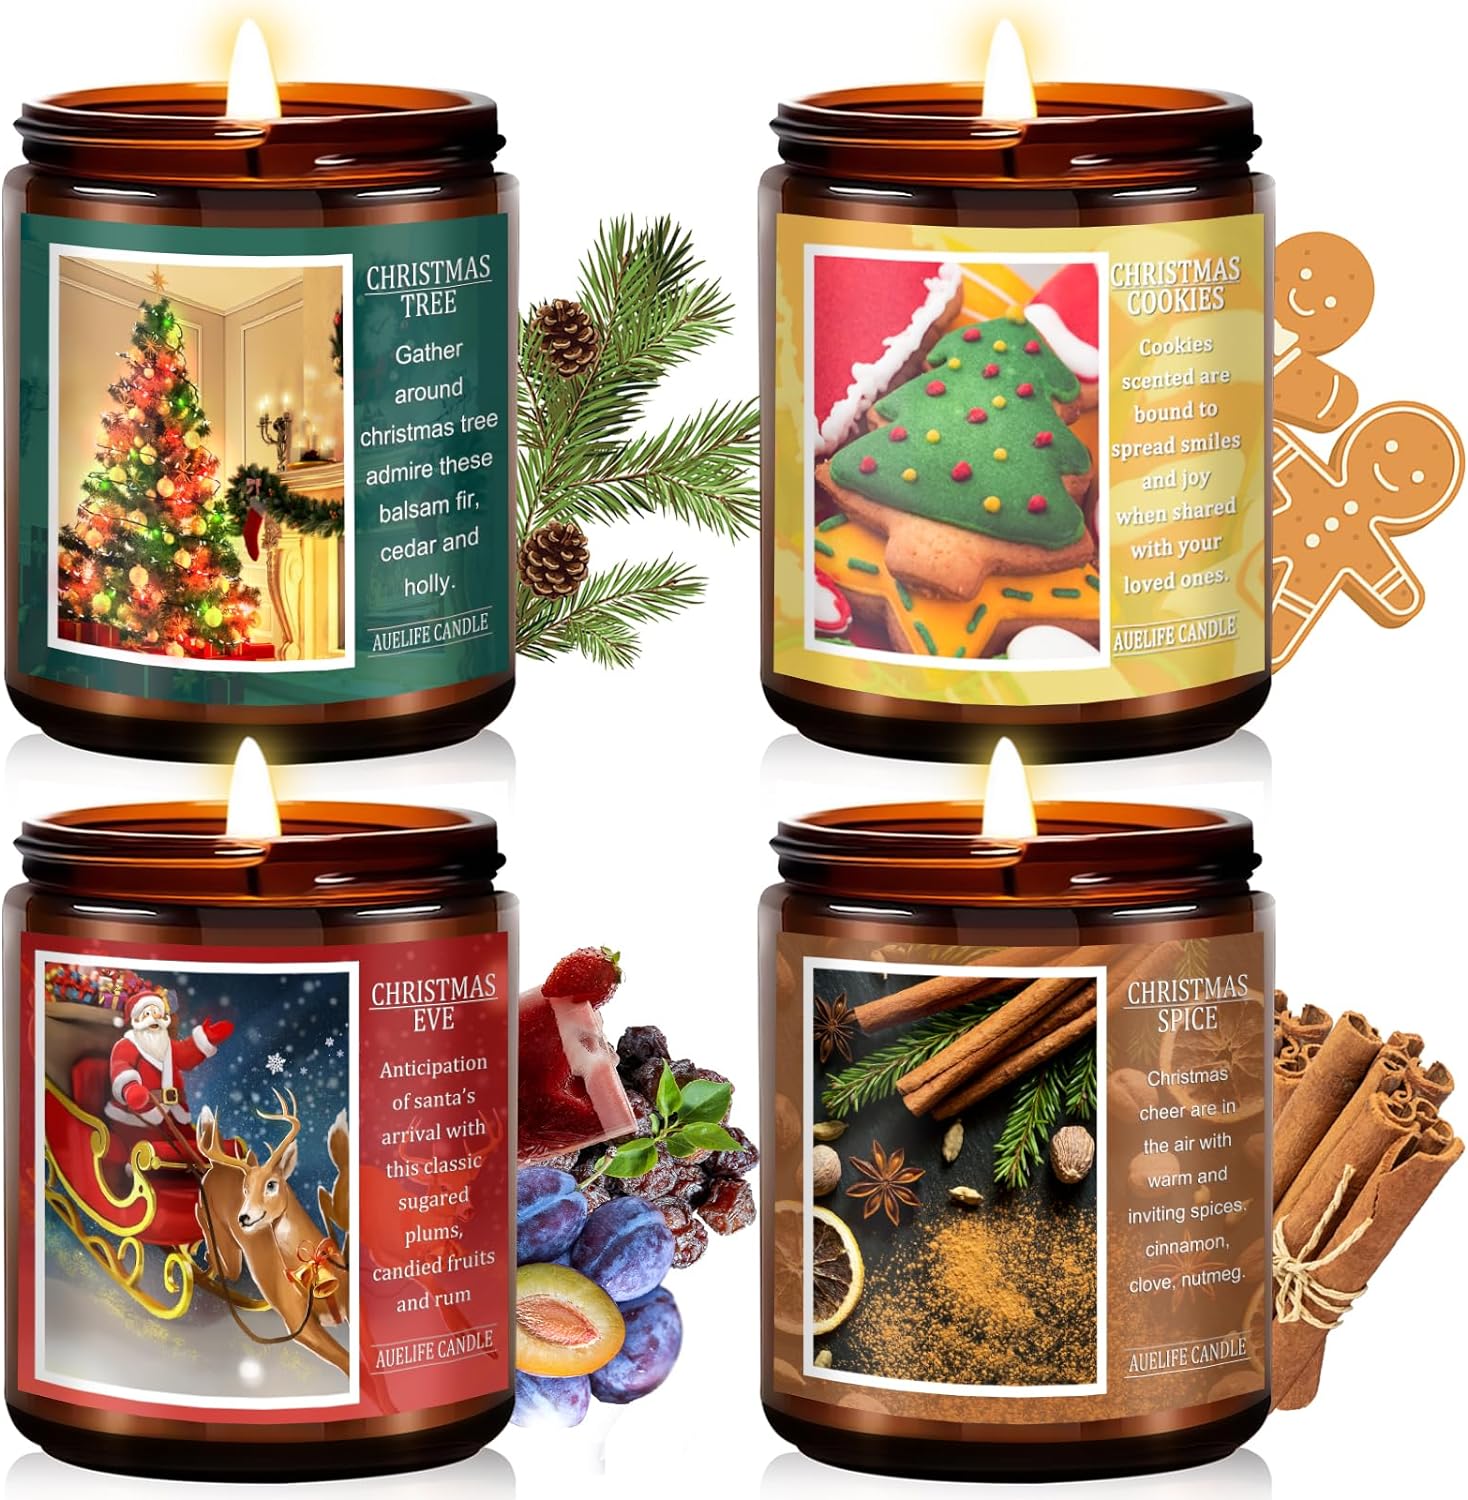 Christmas Candle Set | Scented Candle Gift Set, Christmas Tree/Cookies/EVE/Spice, Christmas Scented Candles for Home - Christmas Candle Gift Set for Women and Men